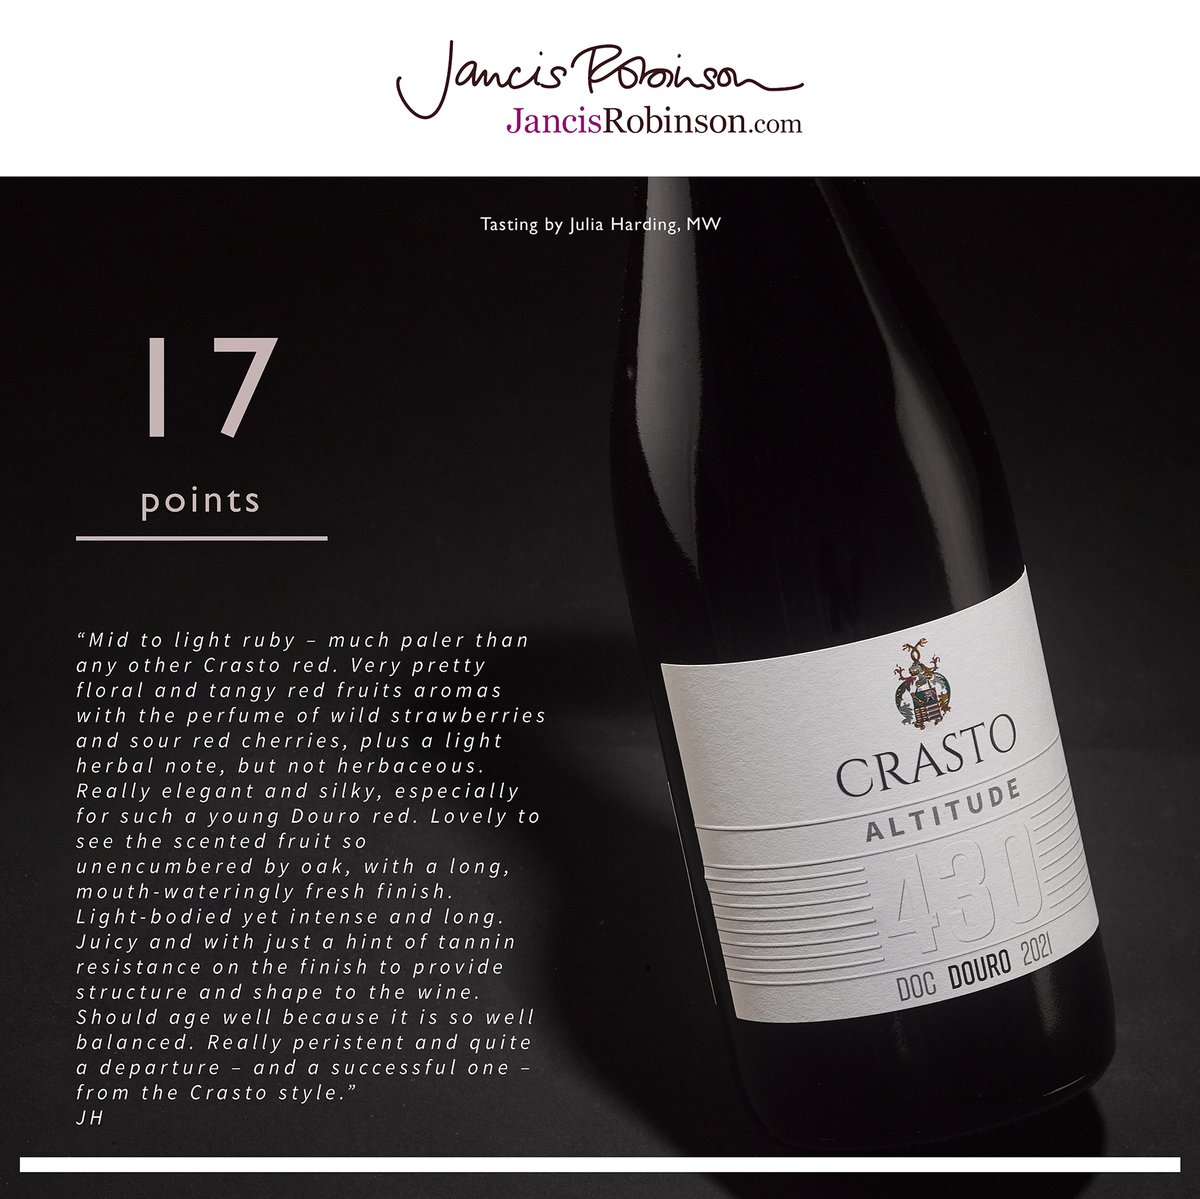 #CrastoAltitude 430 2021 was awarded 17 points in a rating given by Julia Harding MW for @JancisRobinson. Thank you very much for this excellent recognition. 🙏🏼🍷👌🏼👉🏼 Learn more about this #wine here:
quintadocrasto.pt/crasto-altitud…
#DouroWines #VinhosdoDouro #Vinhos #Wines #Wein #Weine